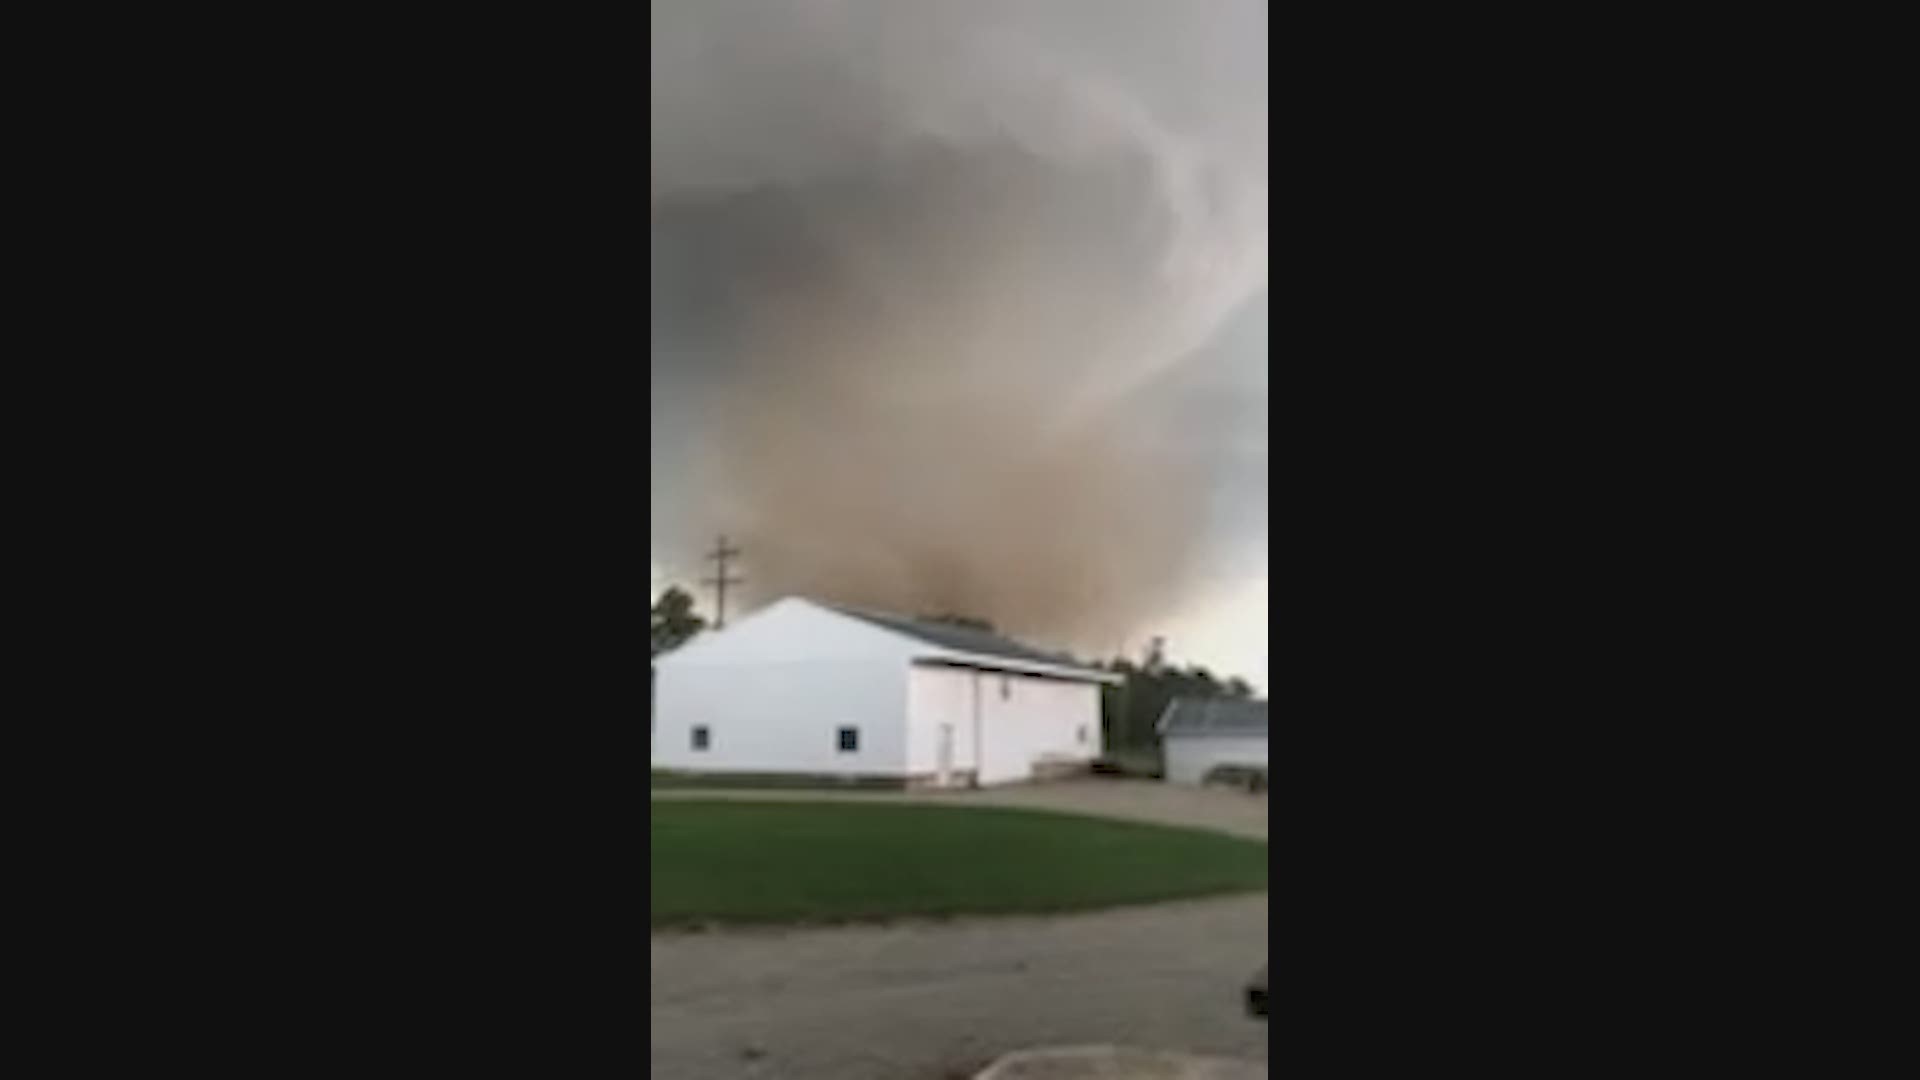 A deputy was responding as storms moved through Indiana on June 18, 2021 and got video of one of the tornados. Video courtesy: Jay County Sheriff's Office